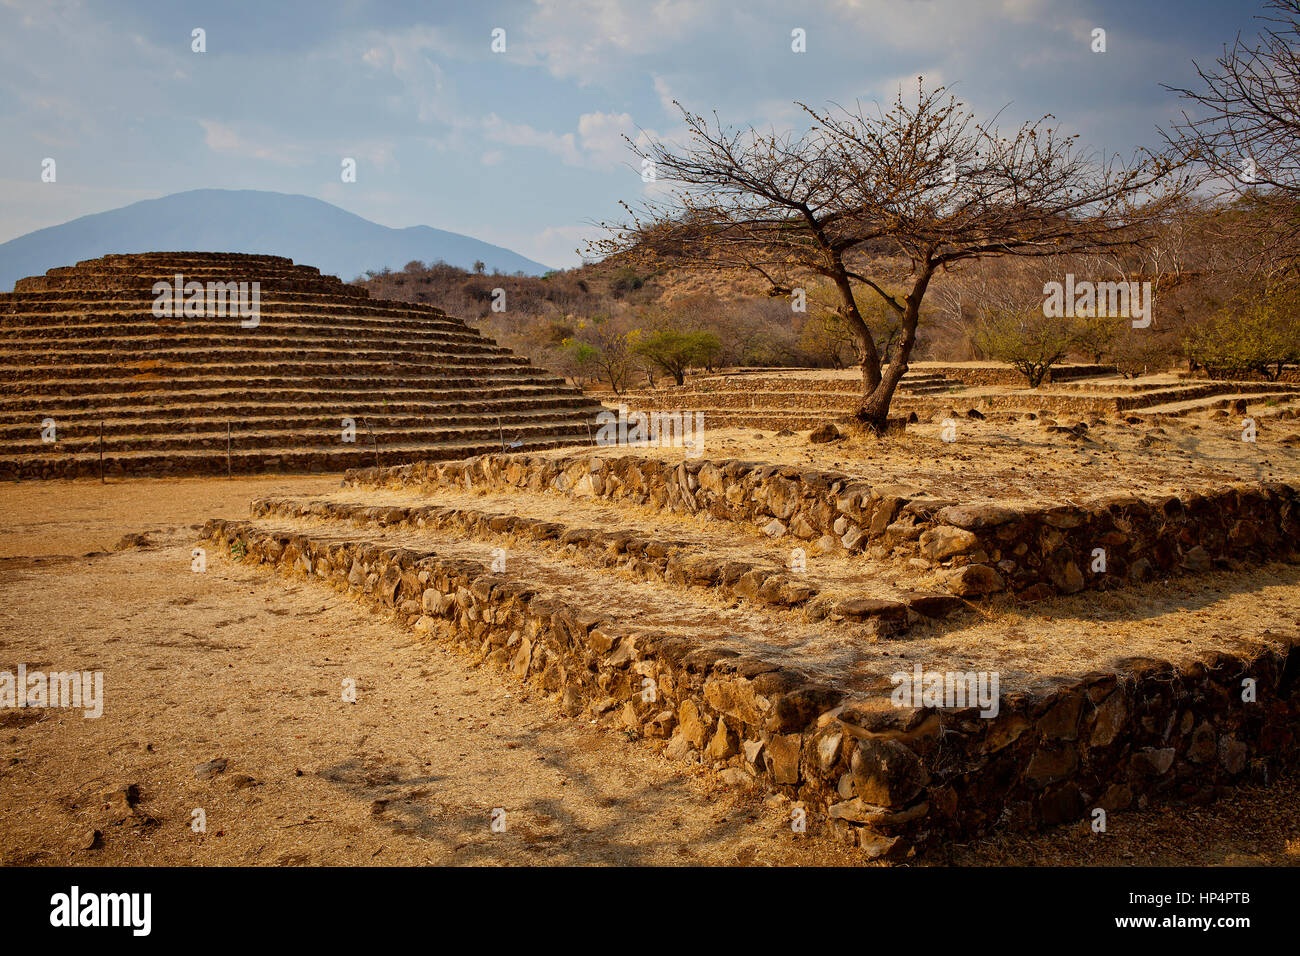 In background circular stepped pyramid, Guachimontones archaeological site , near Teuchitlan, Jalisco, Mexico Stock Photo